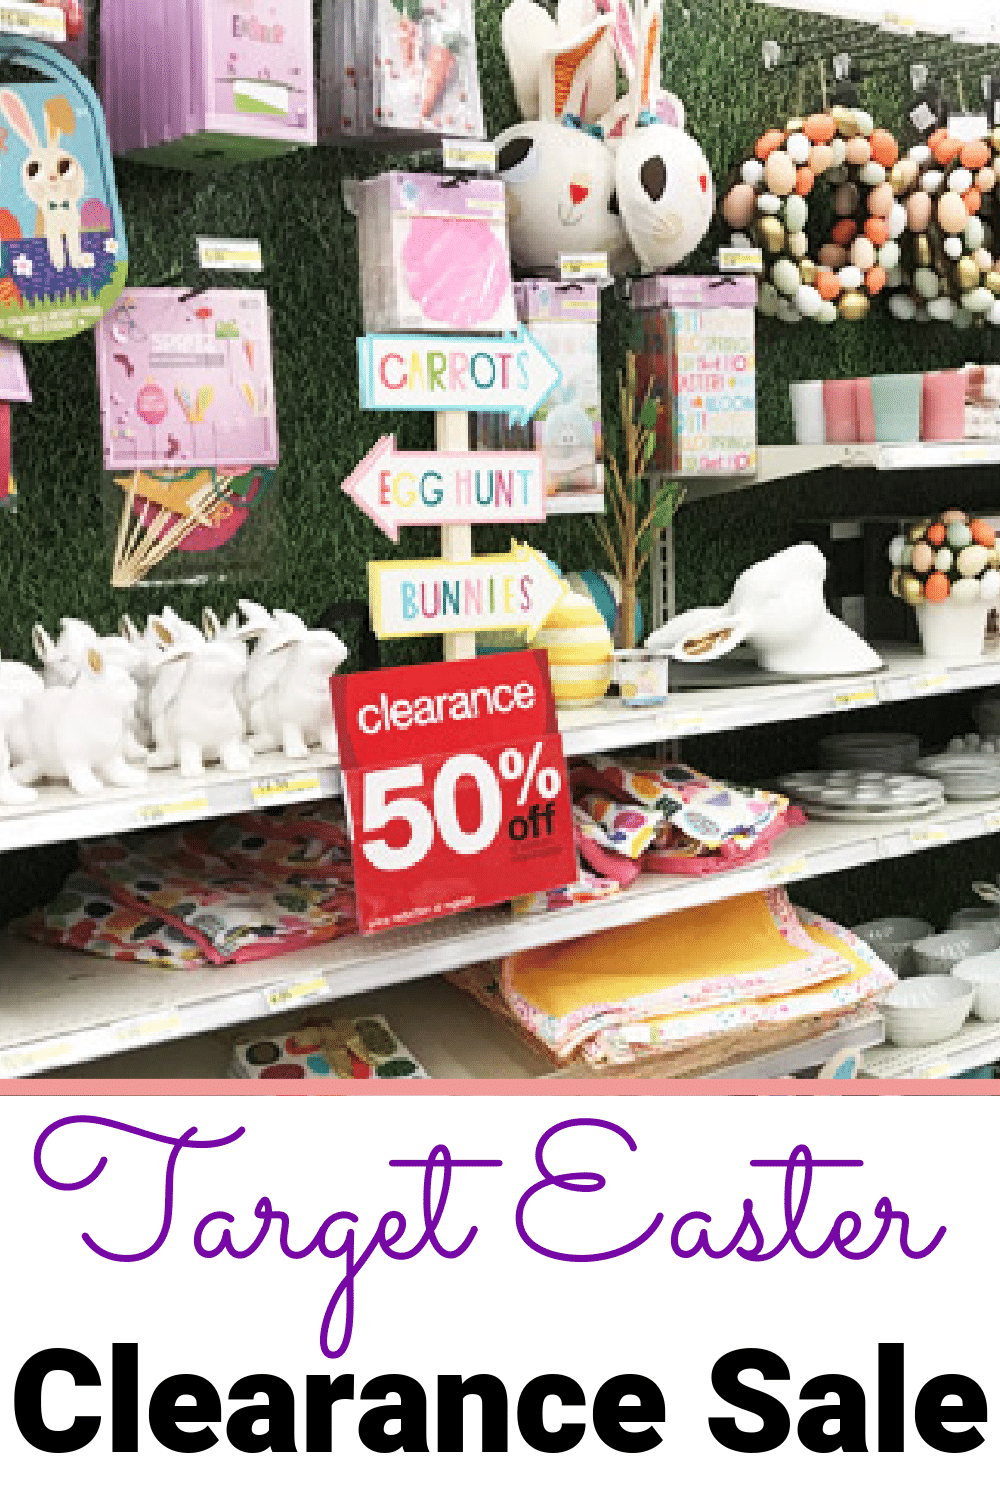 How to Find the Best Clearance Deals//Easter Clearance Shopping 2023 